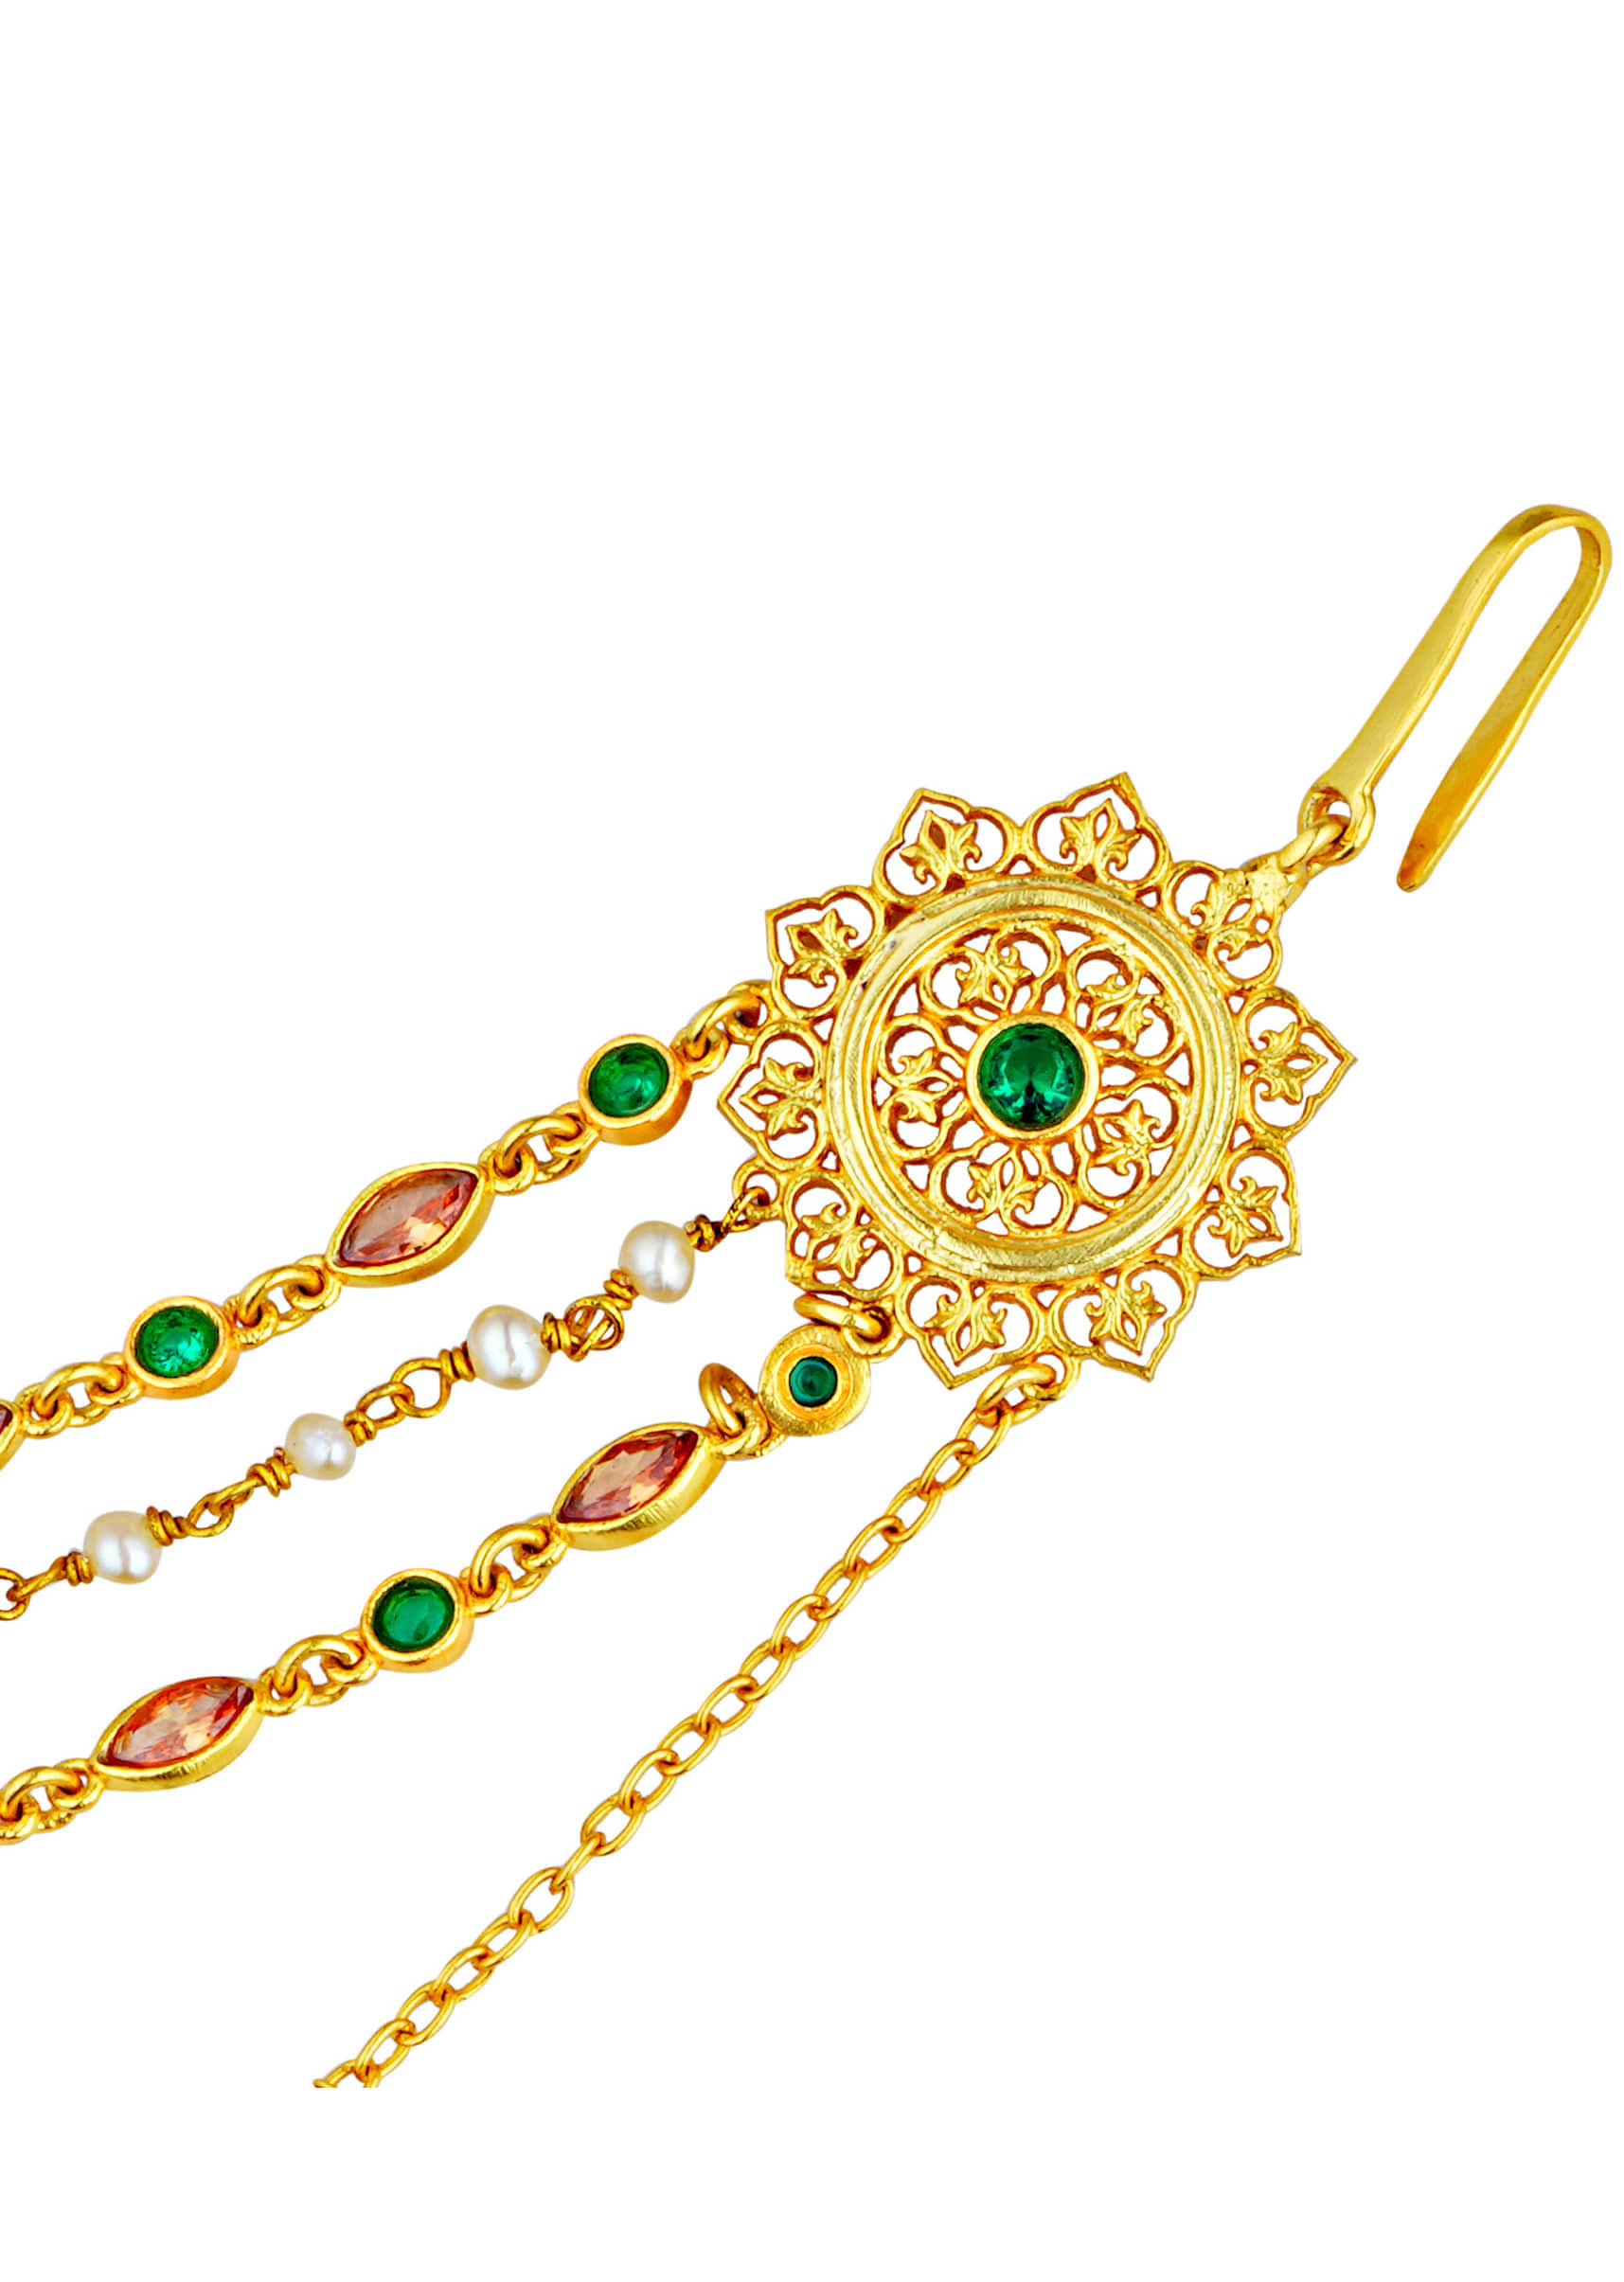 Gold Plated Jhumkas With Pearls And Green Onyx Beads And String Detailing By Zariin